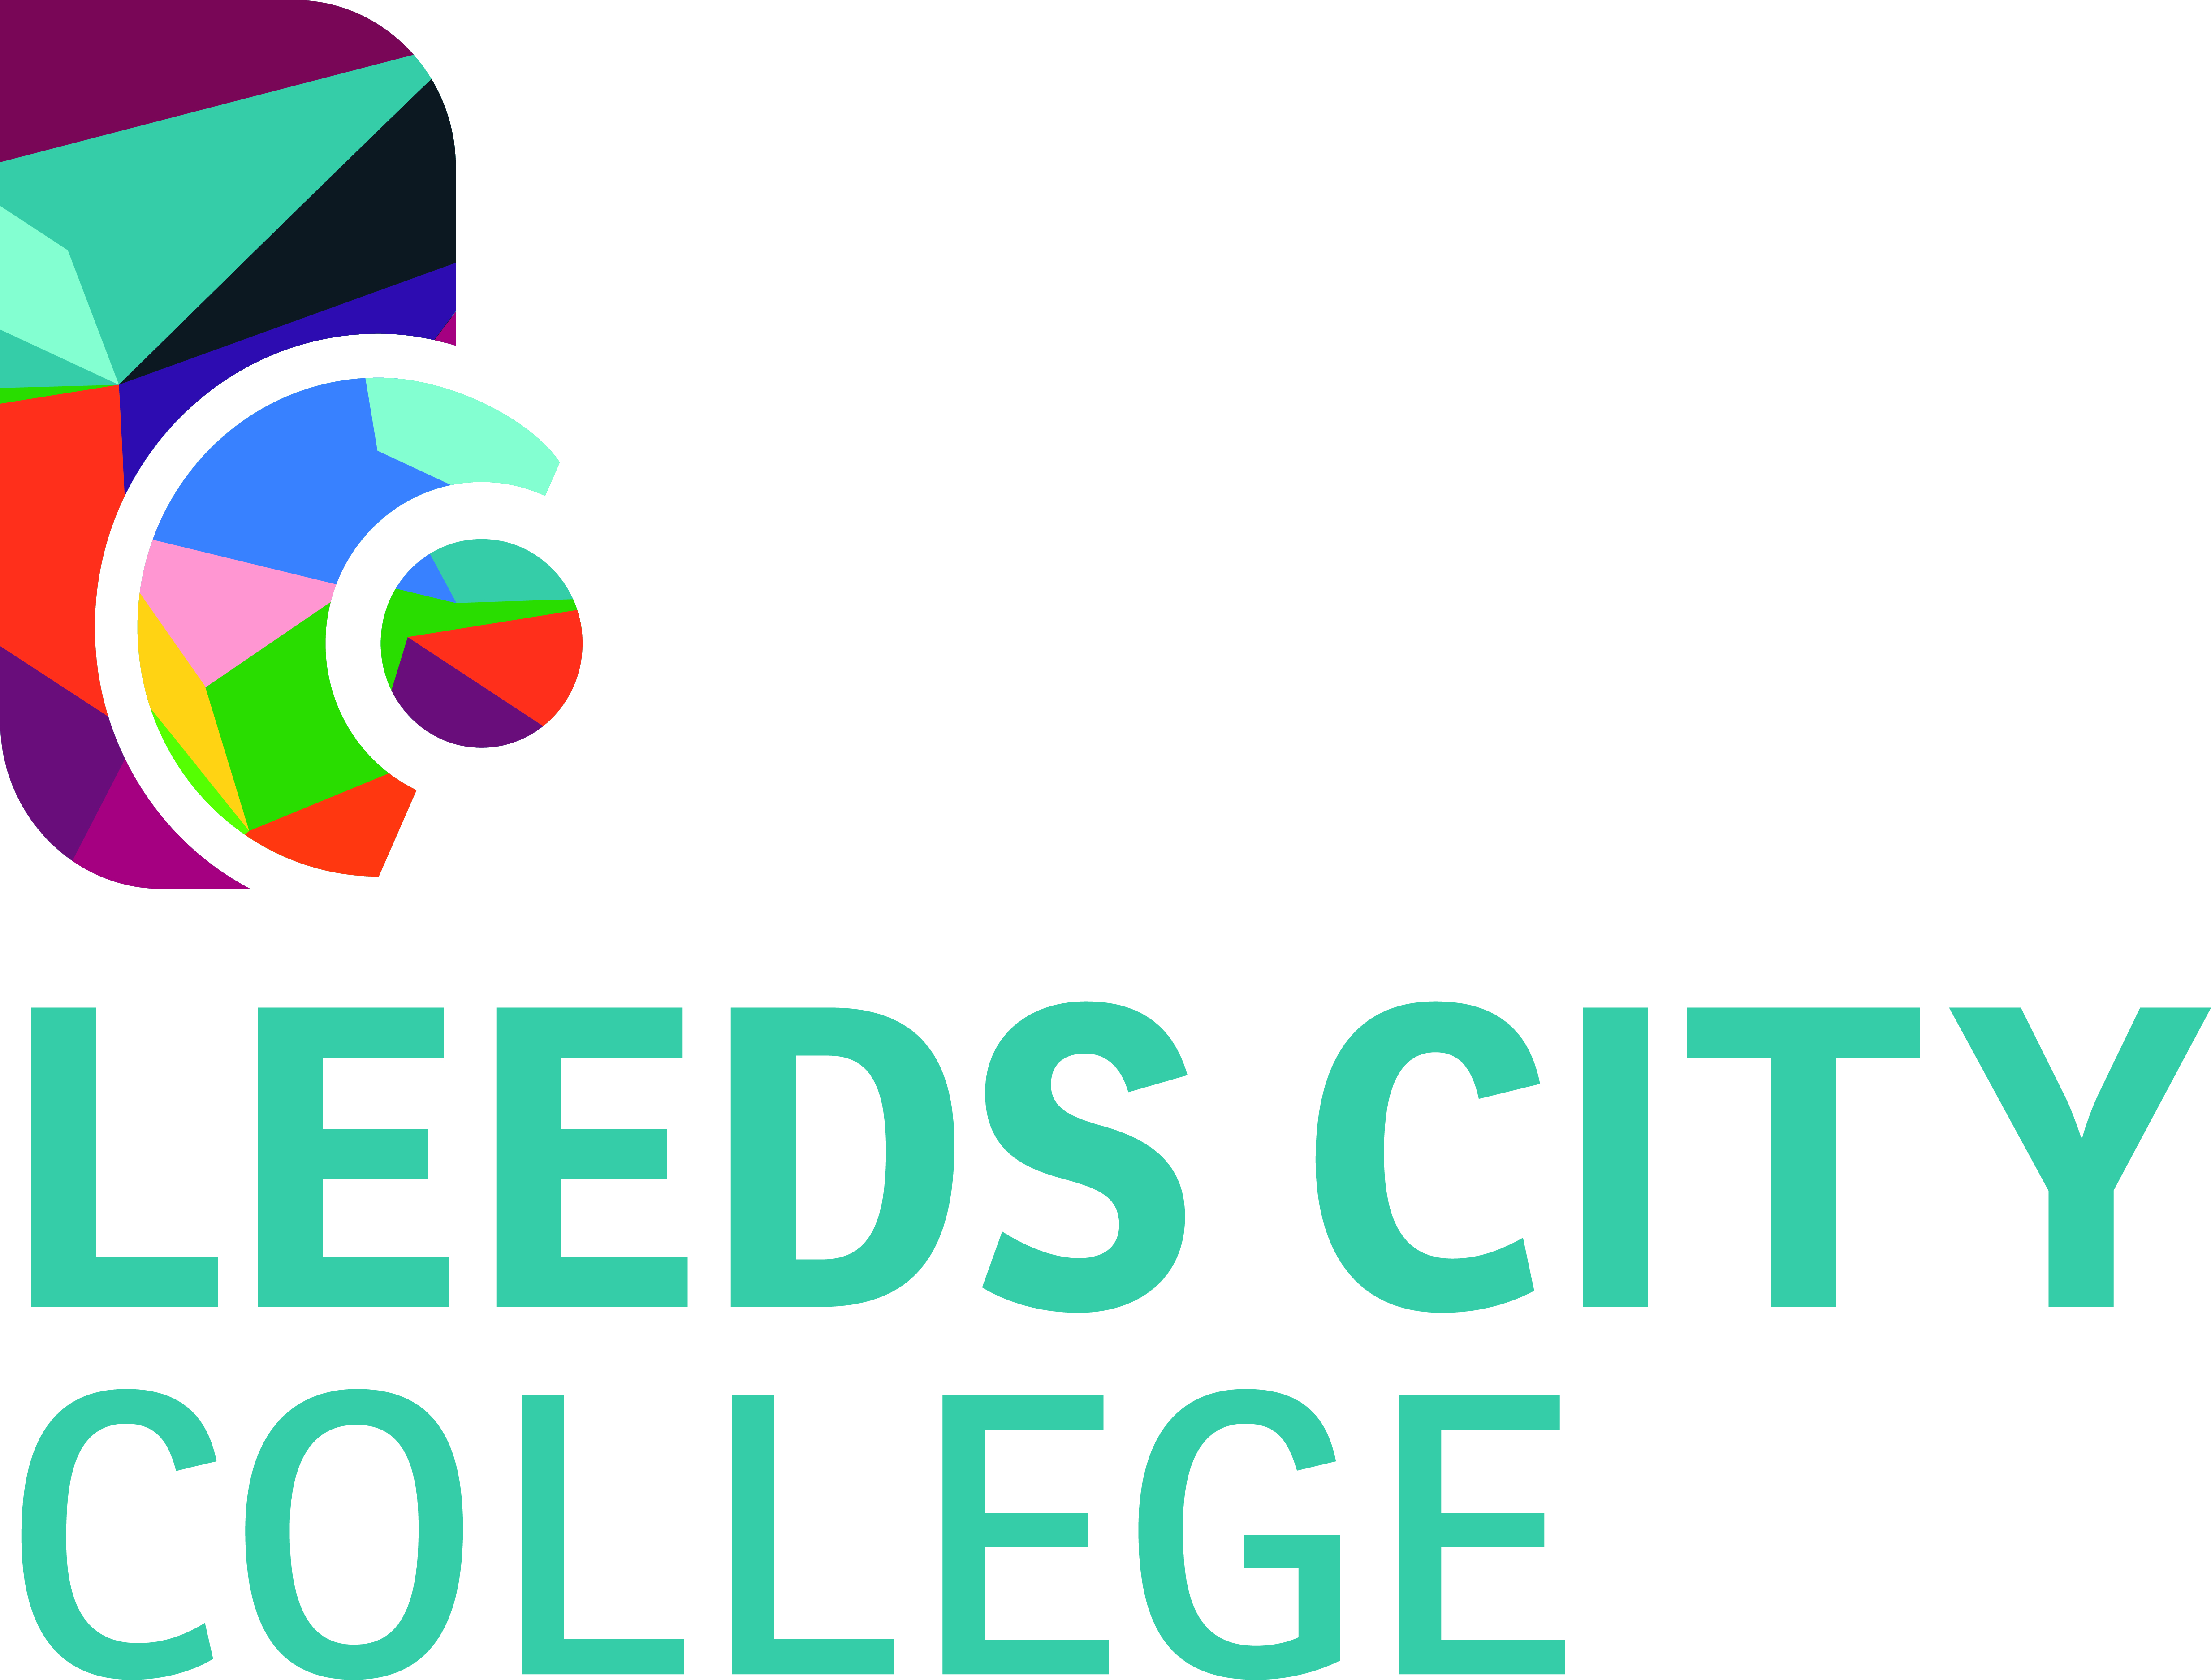 Leeds City College colour logo, text and image 